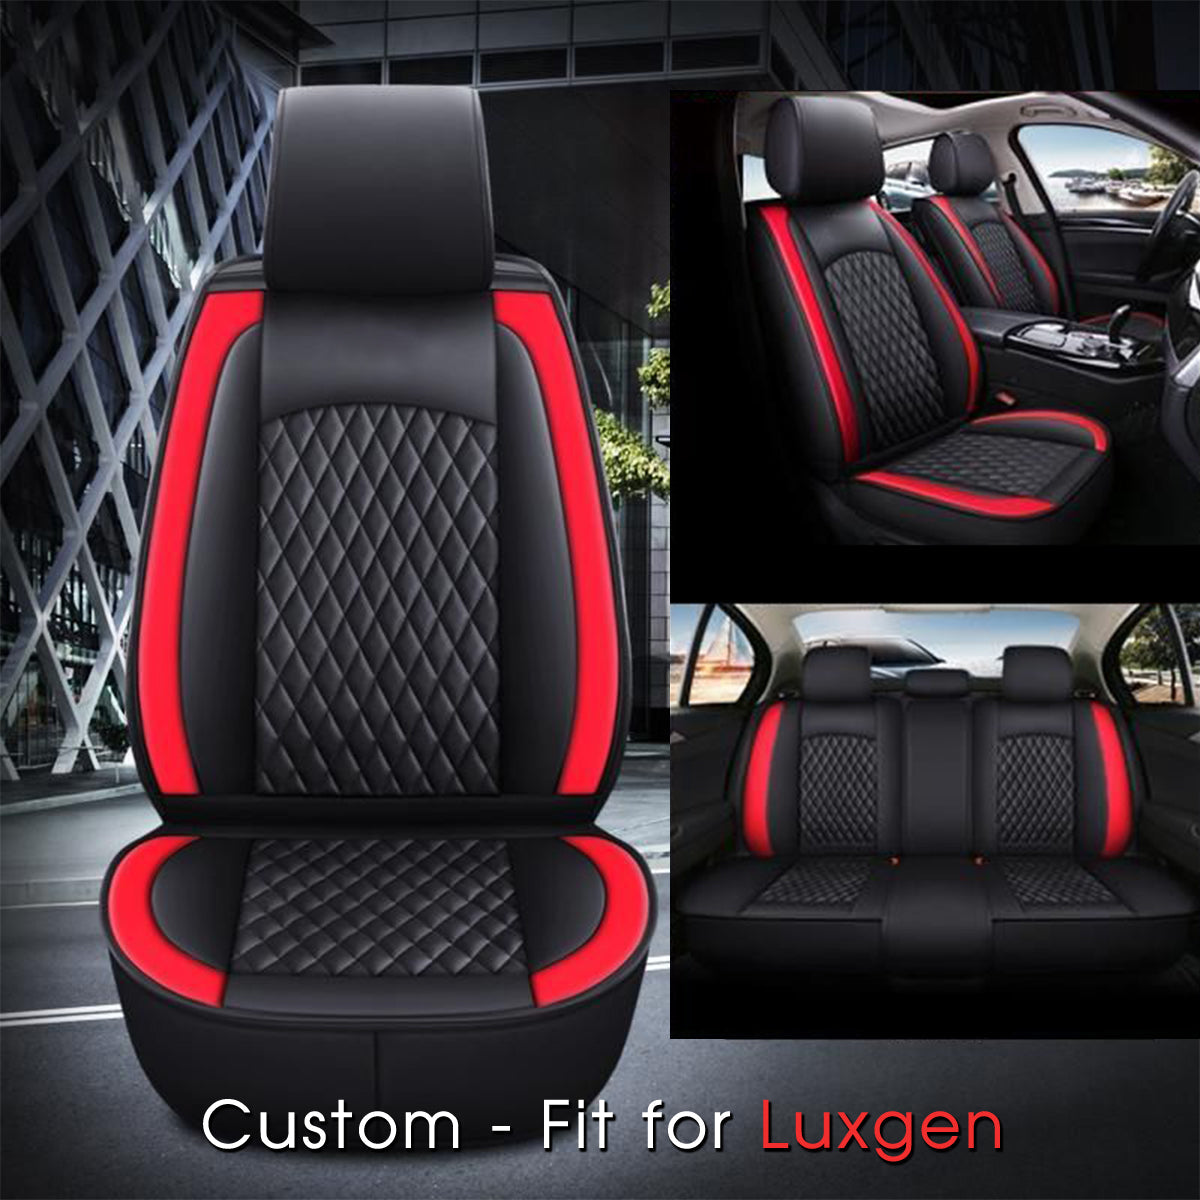 2 Car Seat Covers Full Set, Custom-Fit For Car, Waterproof Leather Front Rear Seat Automotive Protection Cushions, Car Accessories WALE211